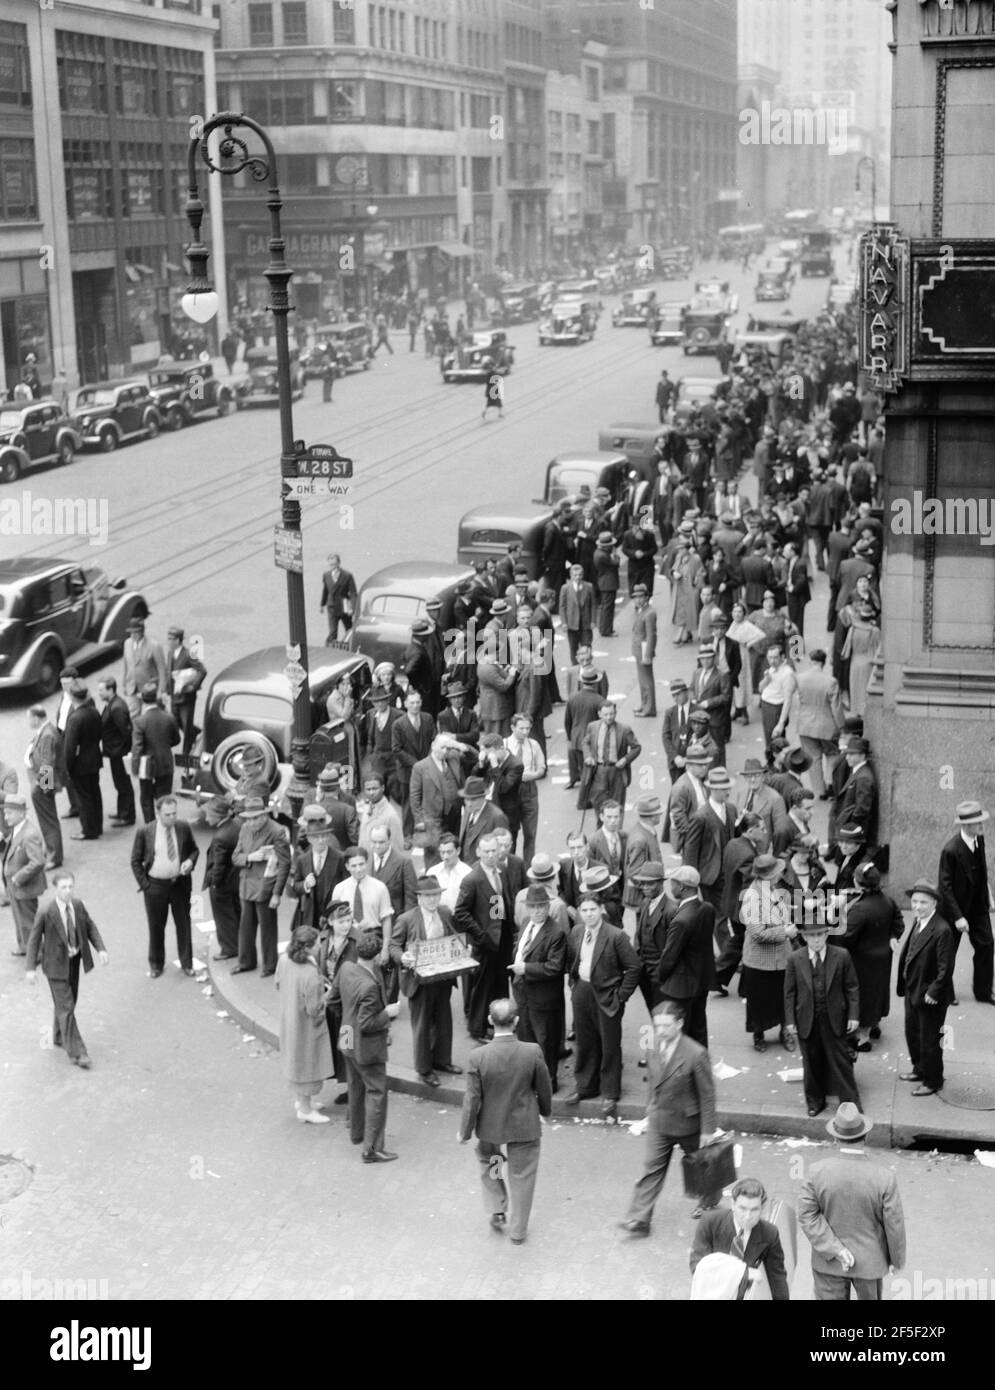 Background for Hightstown project photographs. Seventh Avenue and West 28th Street, New York. Garment workers leave the factories for noon hour. June 1936. Photograph by Dorothea Lange. Stock Photo